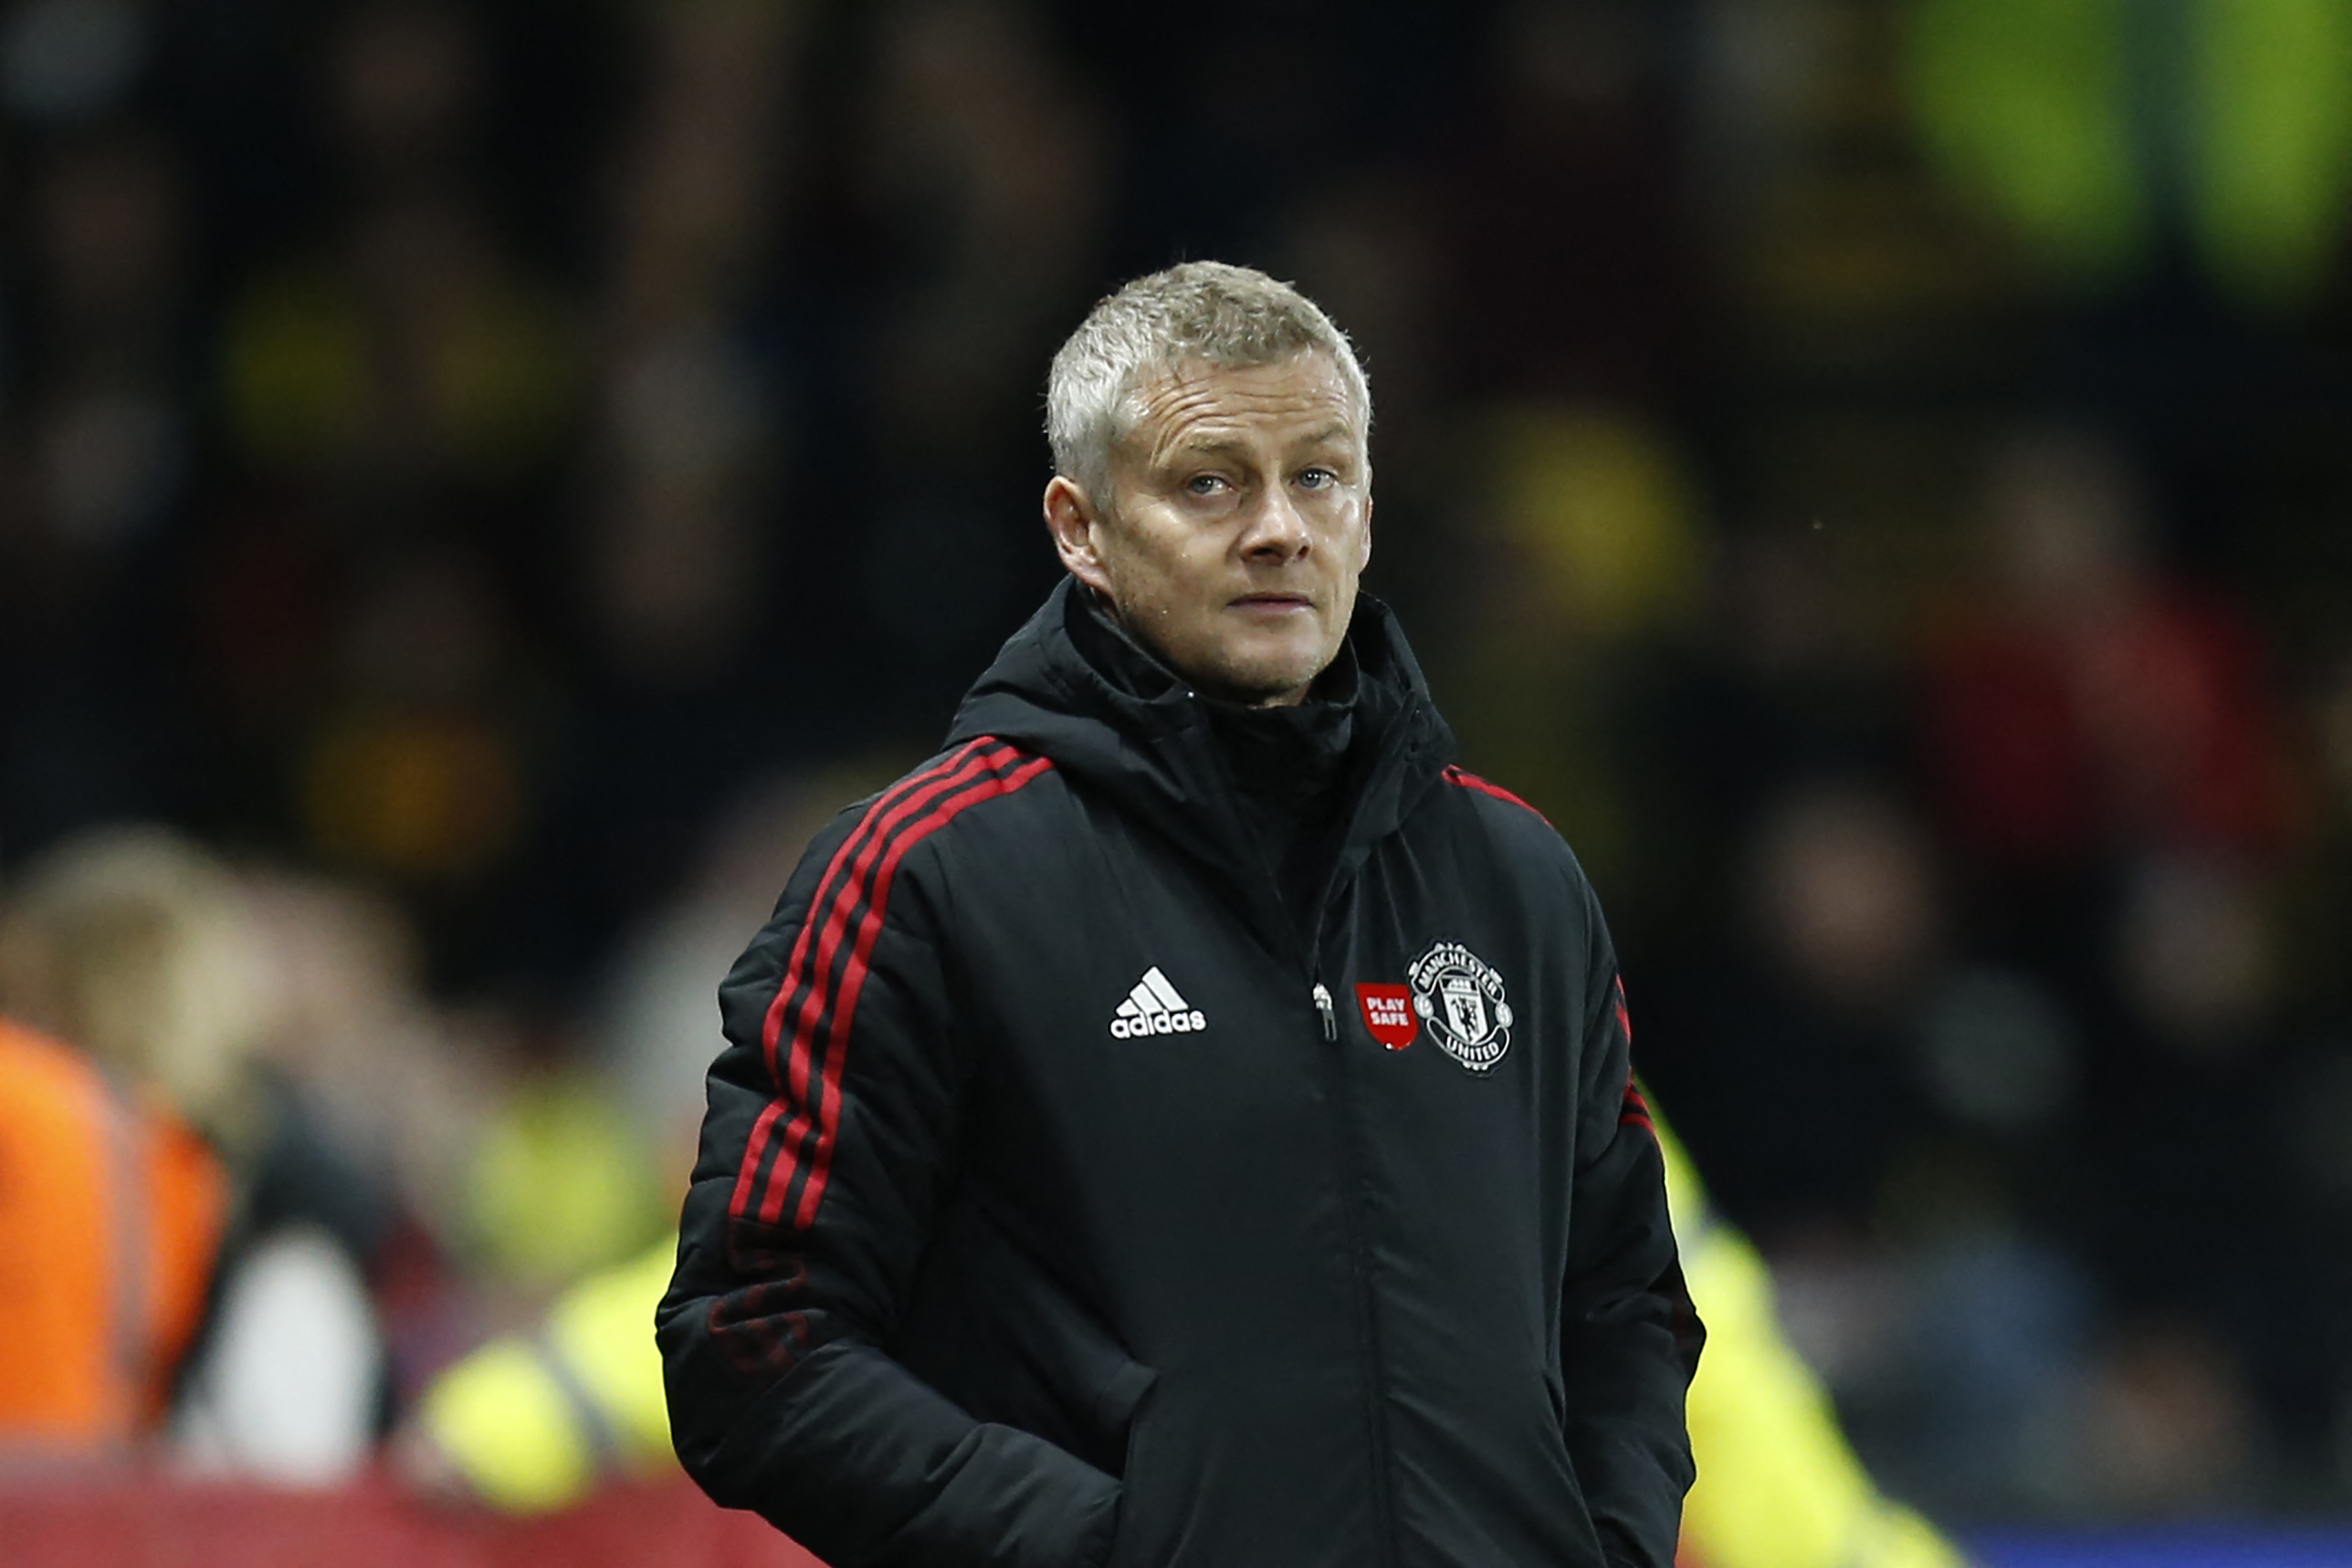 Ole Gunnar Solskjaer is a candidate for the Canada men's national team job.